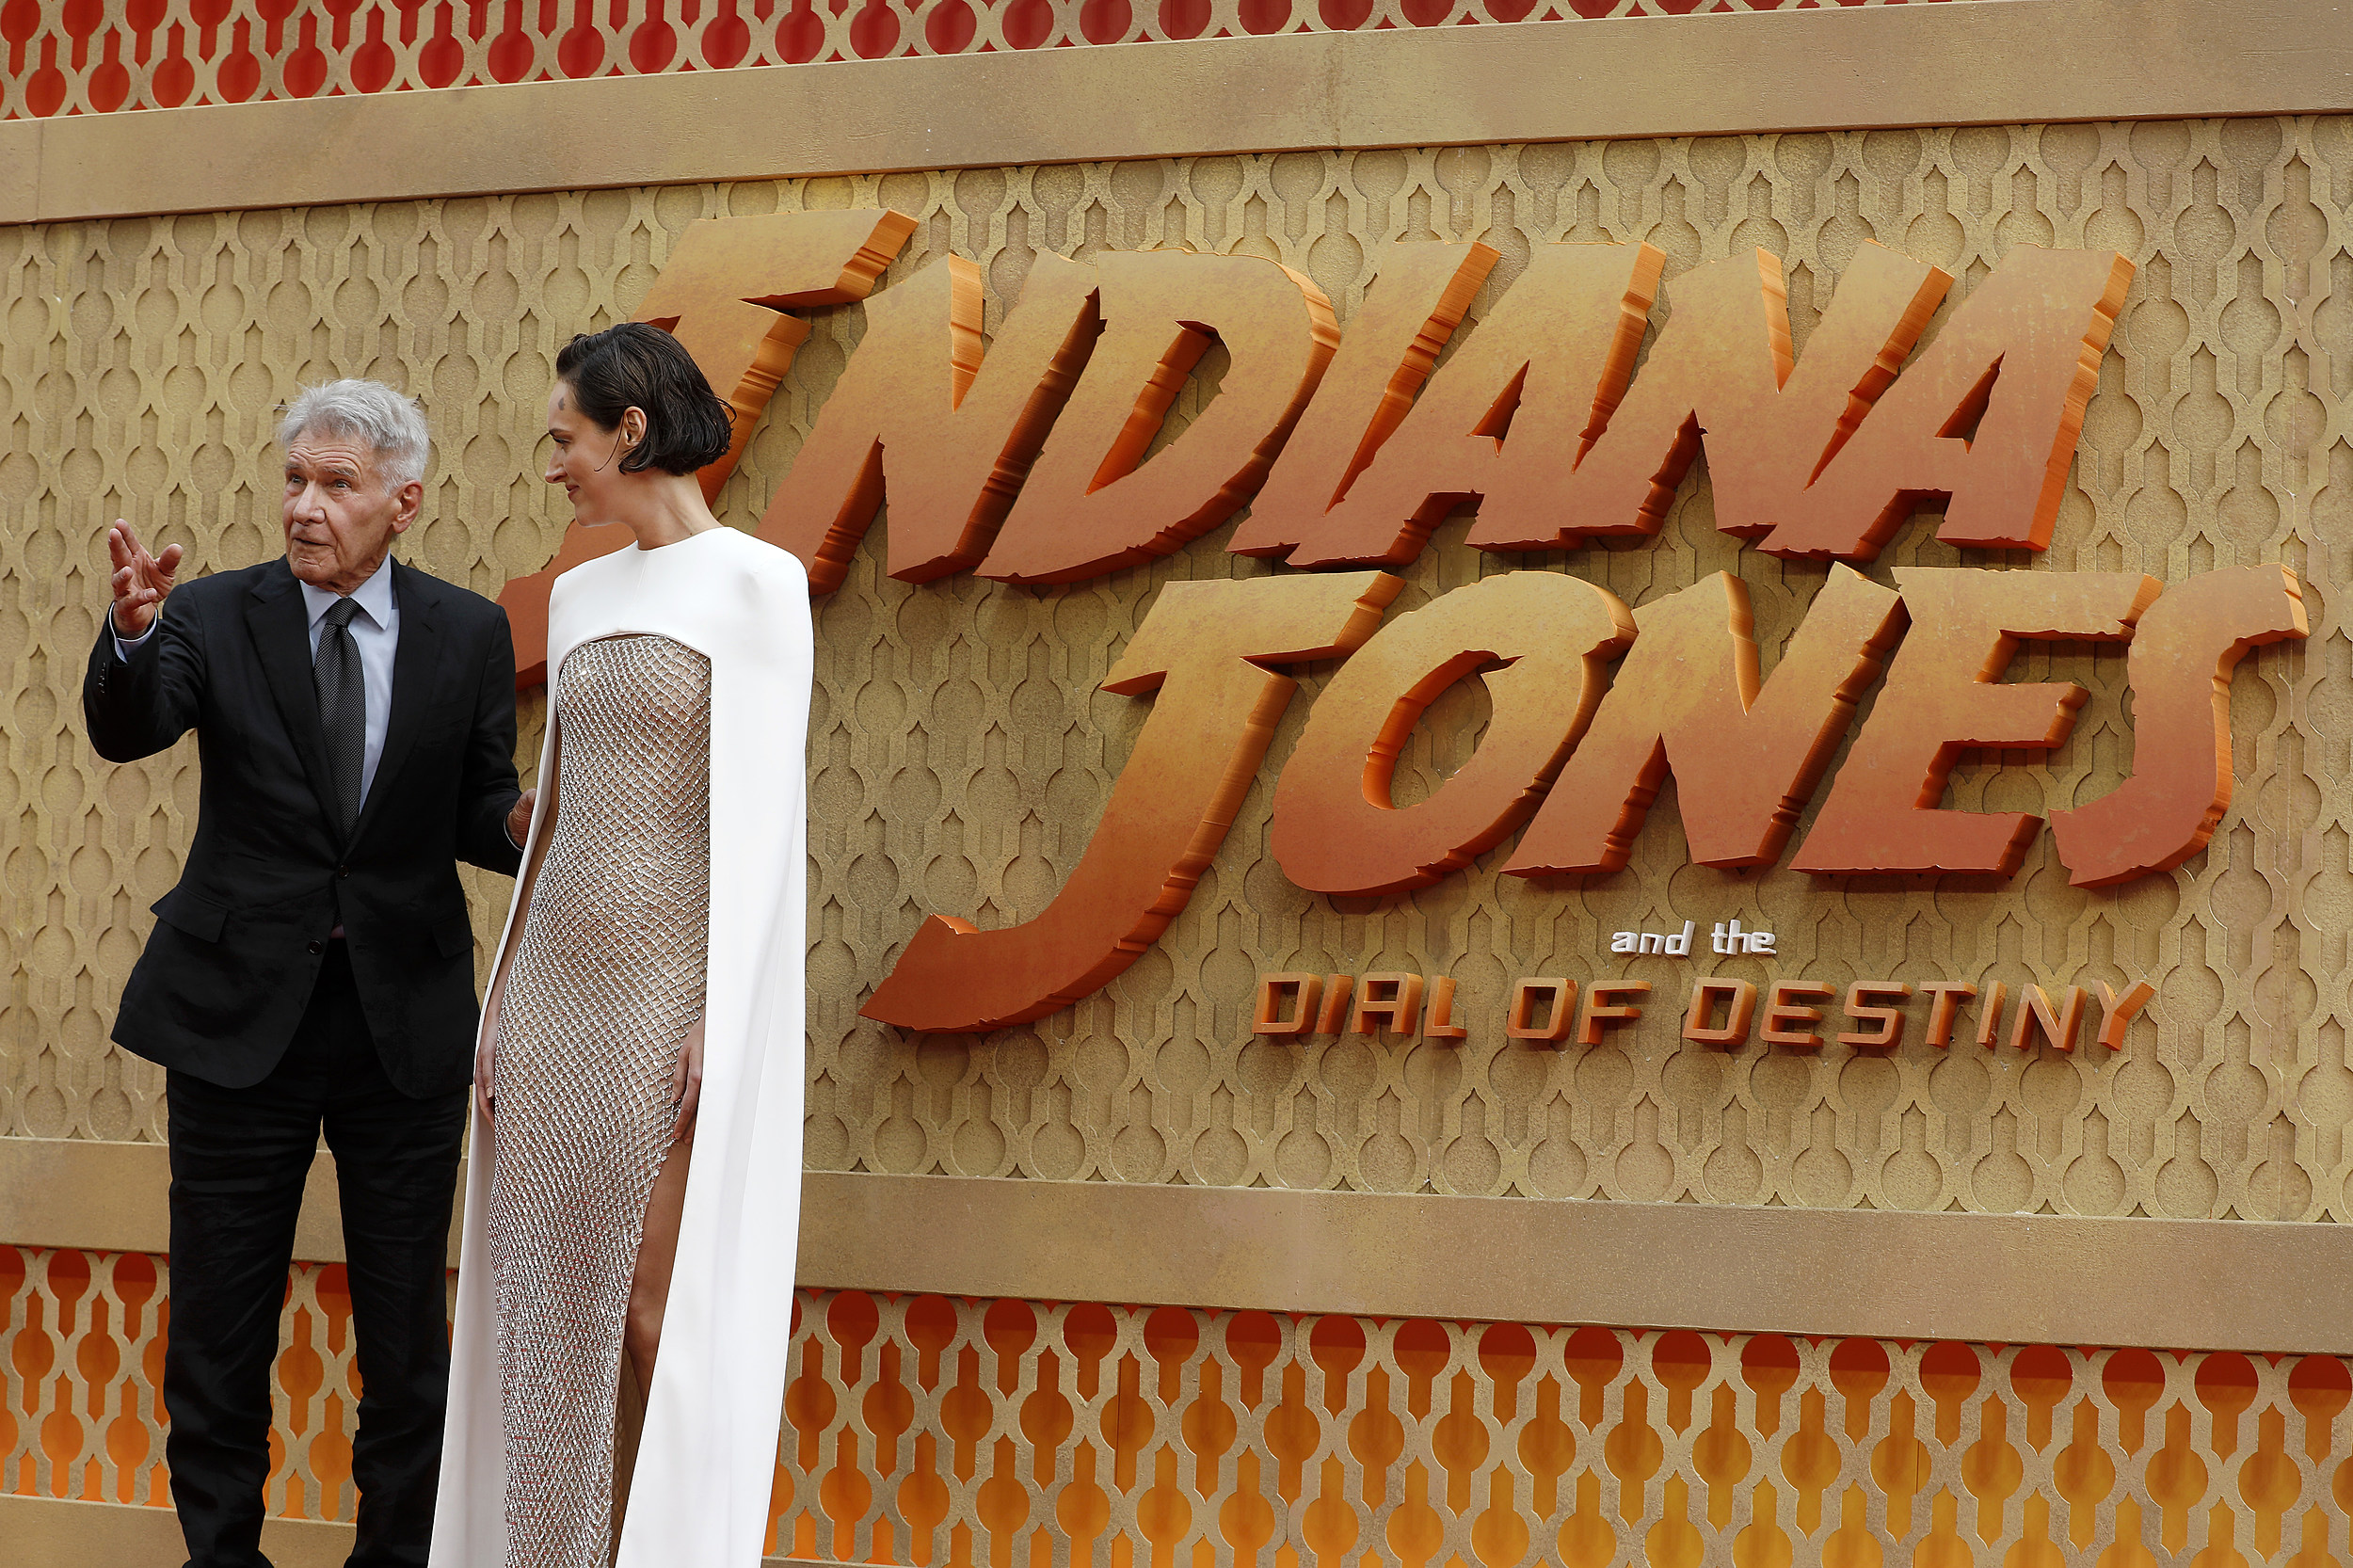 Final Indiana Jones Movie Releases 42 Years After Franchise Premiere-
I’m Nerding Out